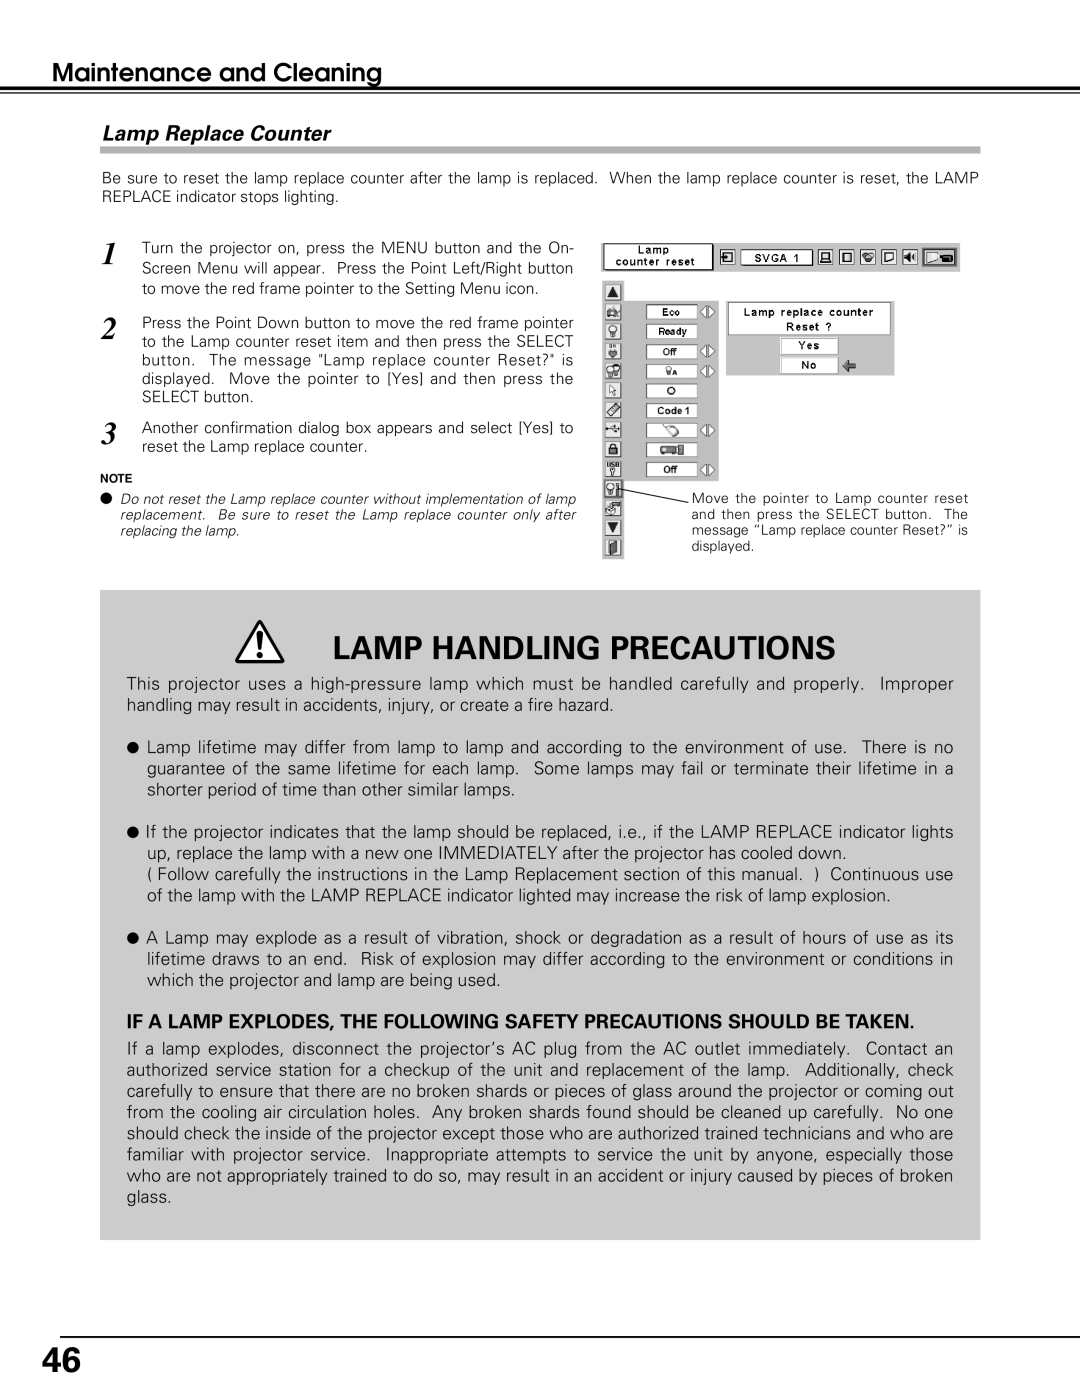 Black Box LC-XE10 instruction manual Lamp Replace Counter, Lamp Handling Precautions, Maintenance and Cleaning 